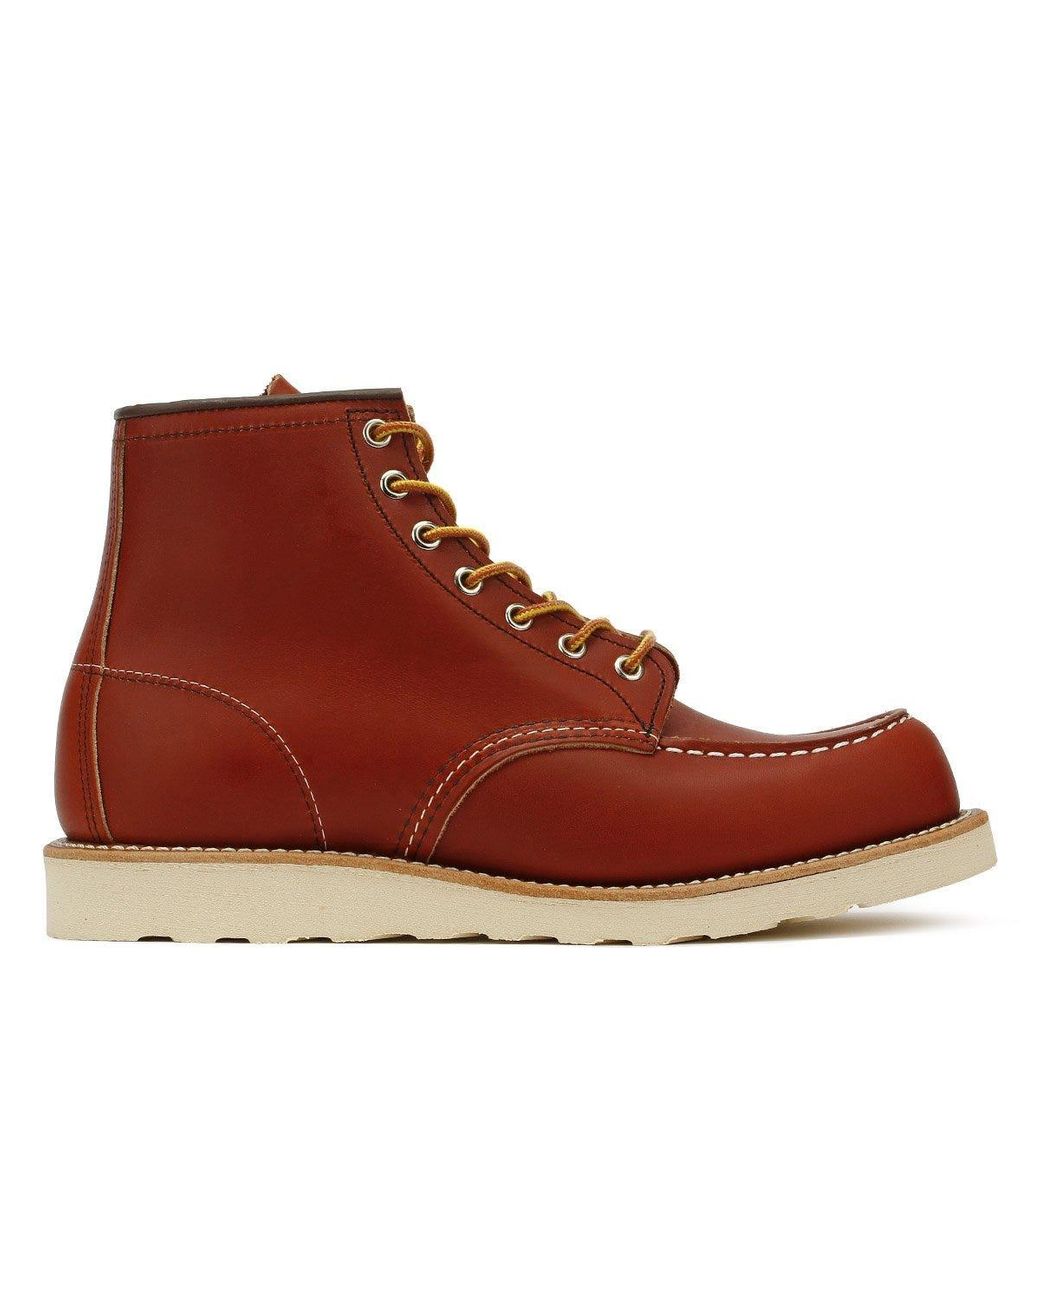 red wing shoes berkley